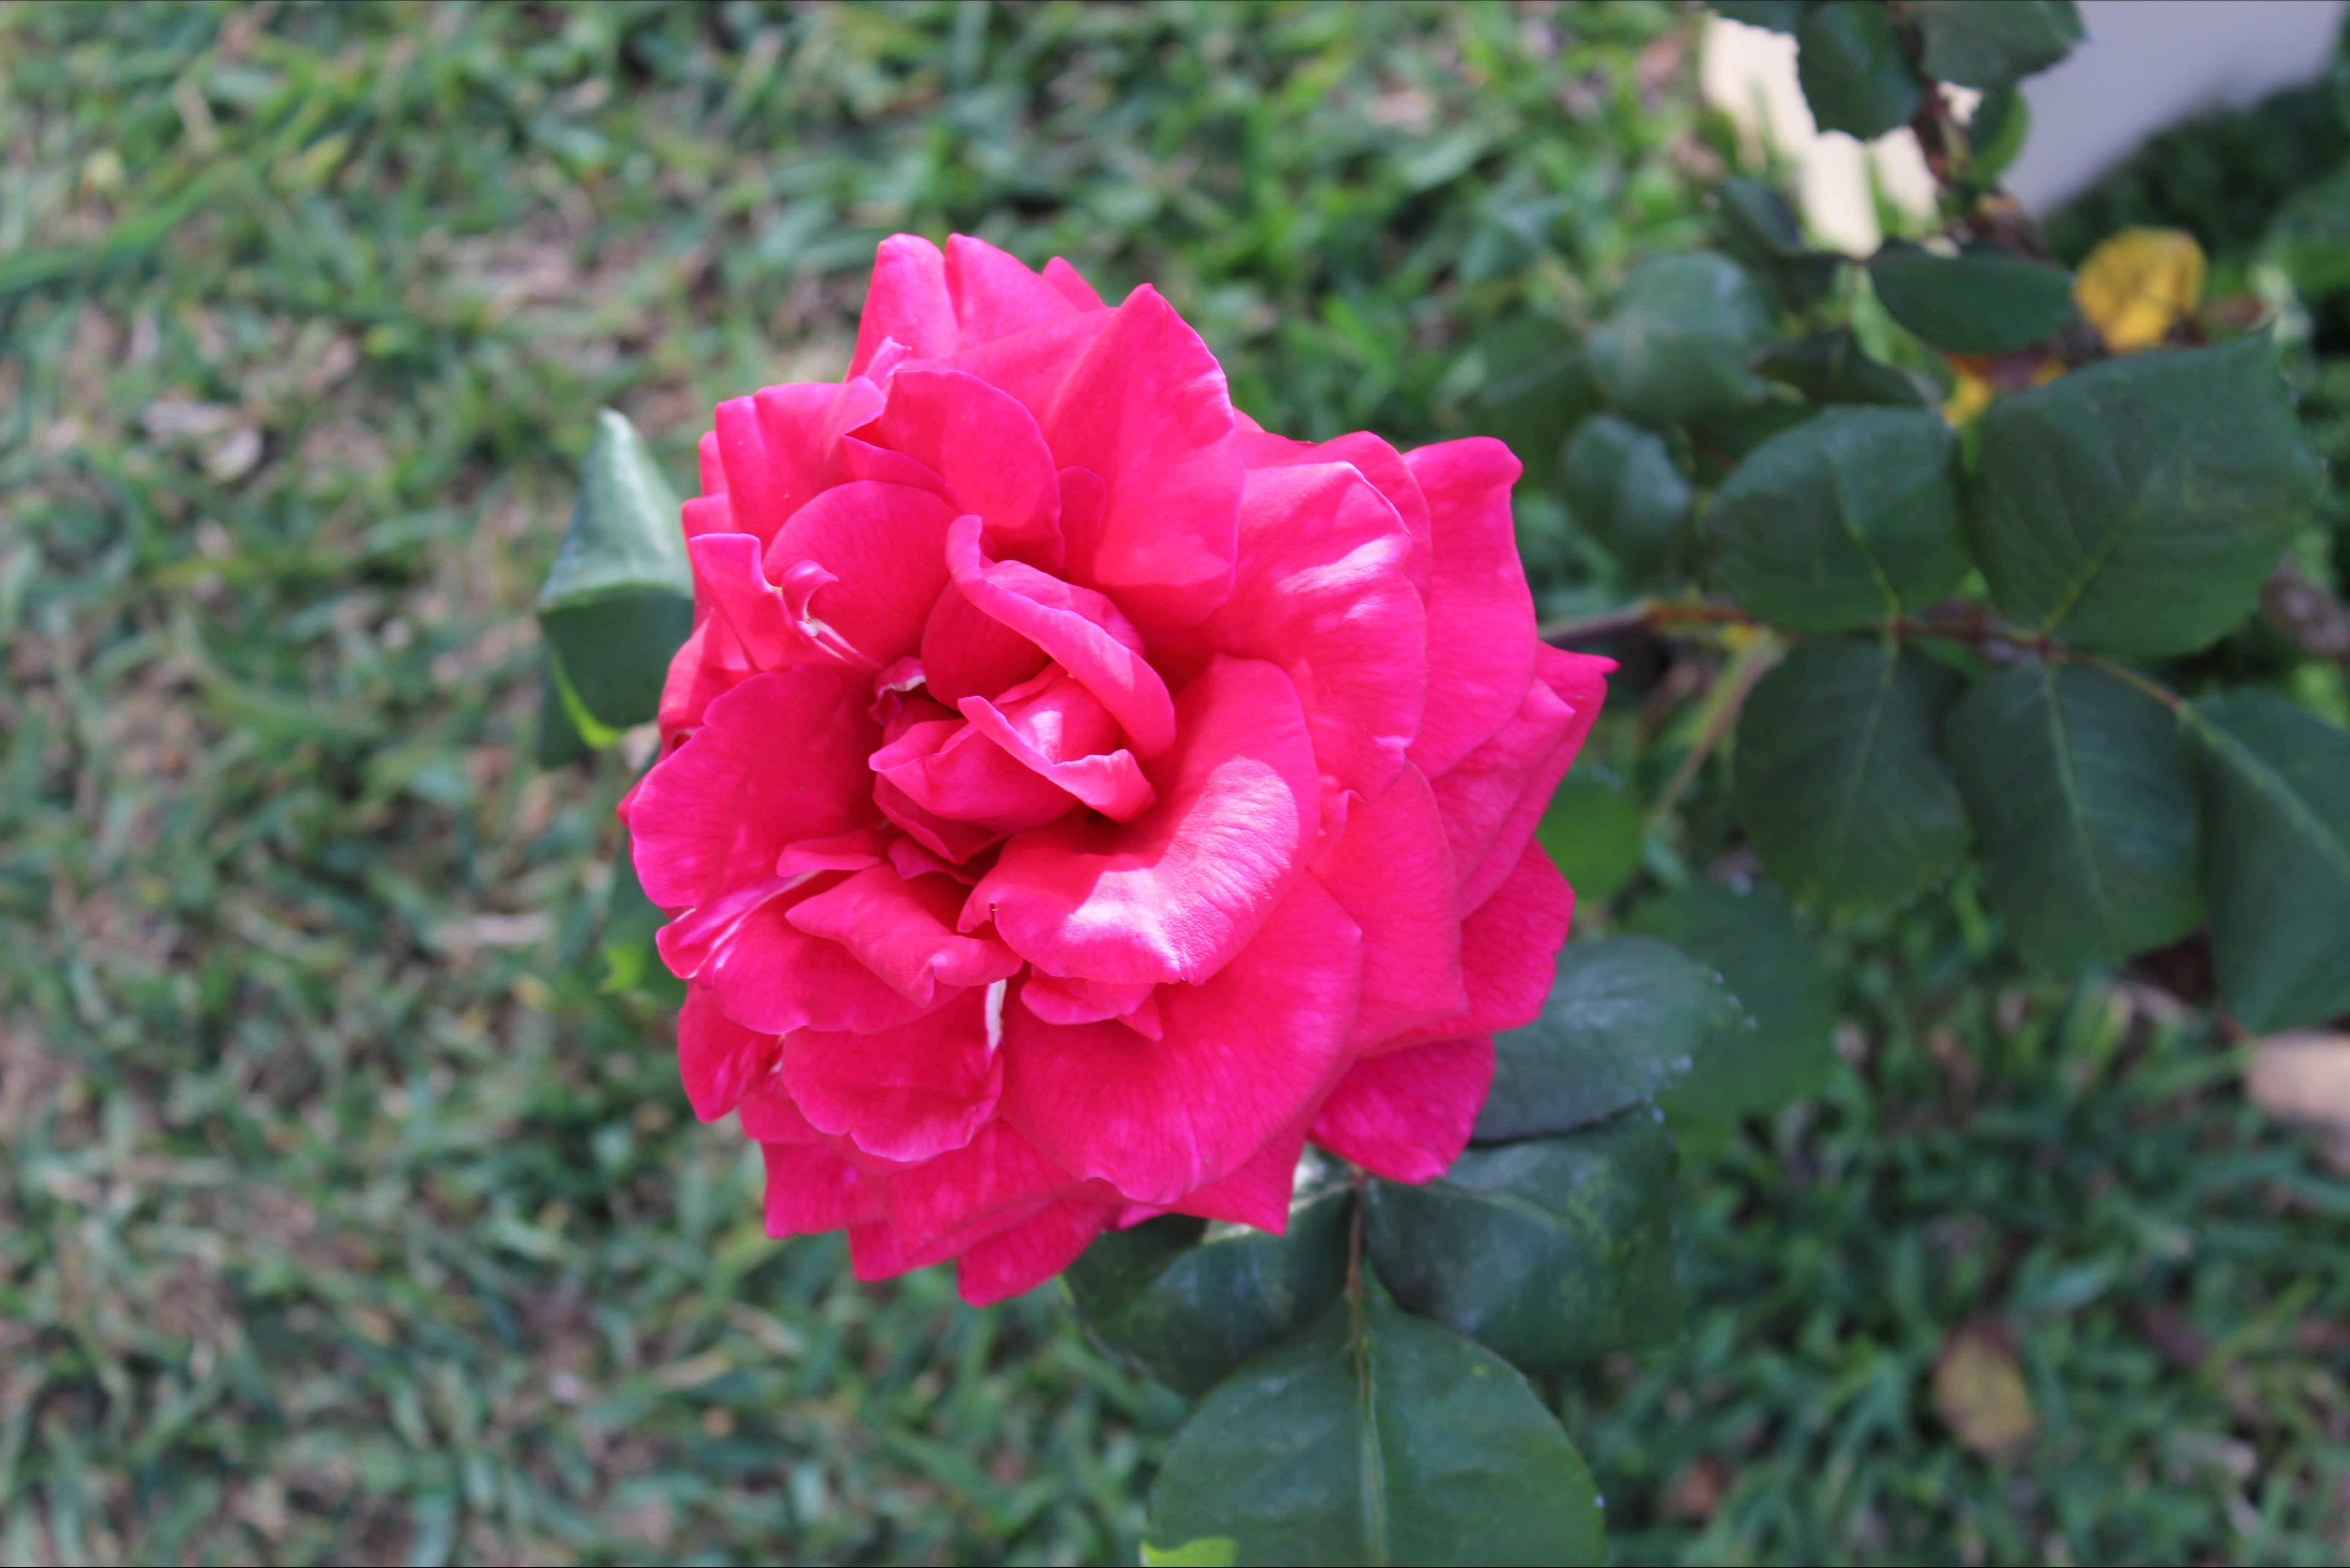 One of many roses available to view.